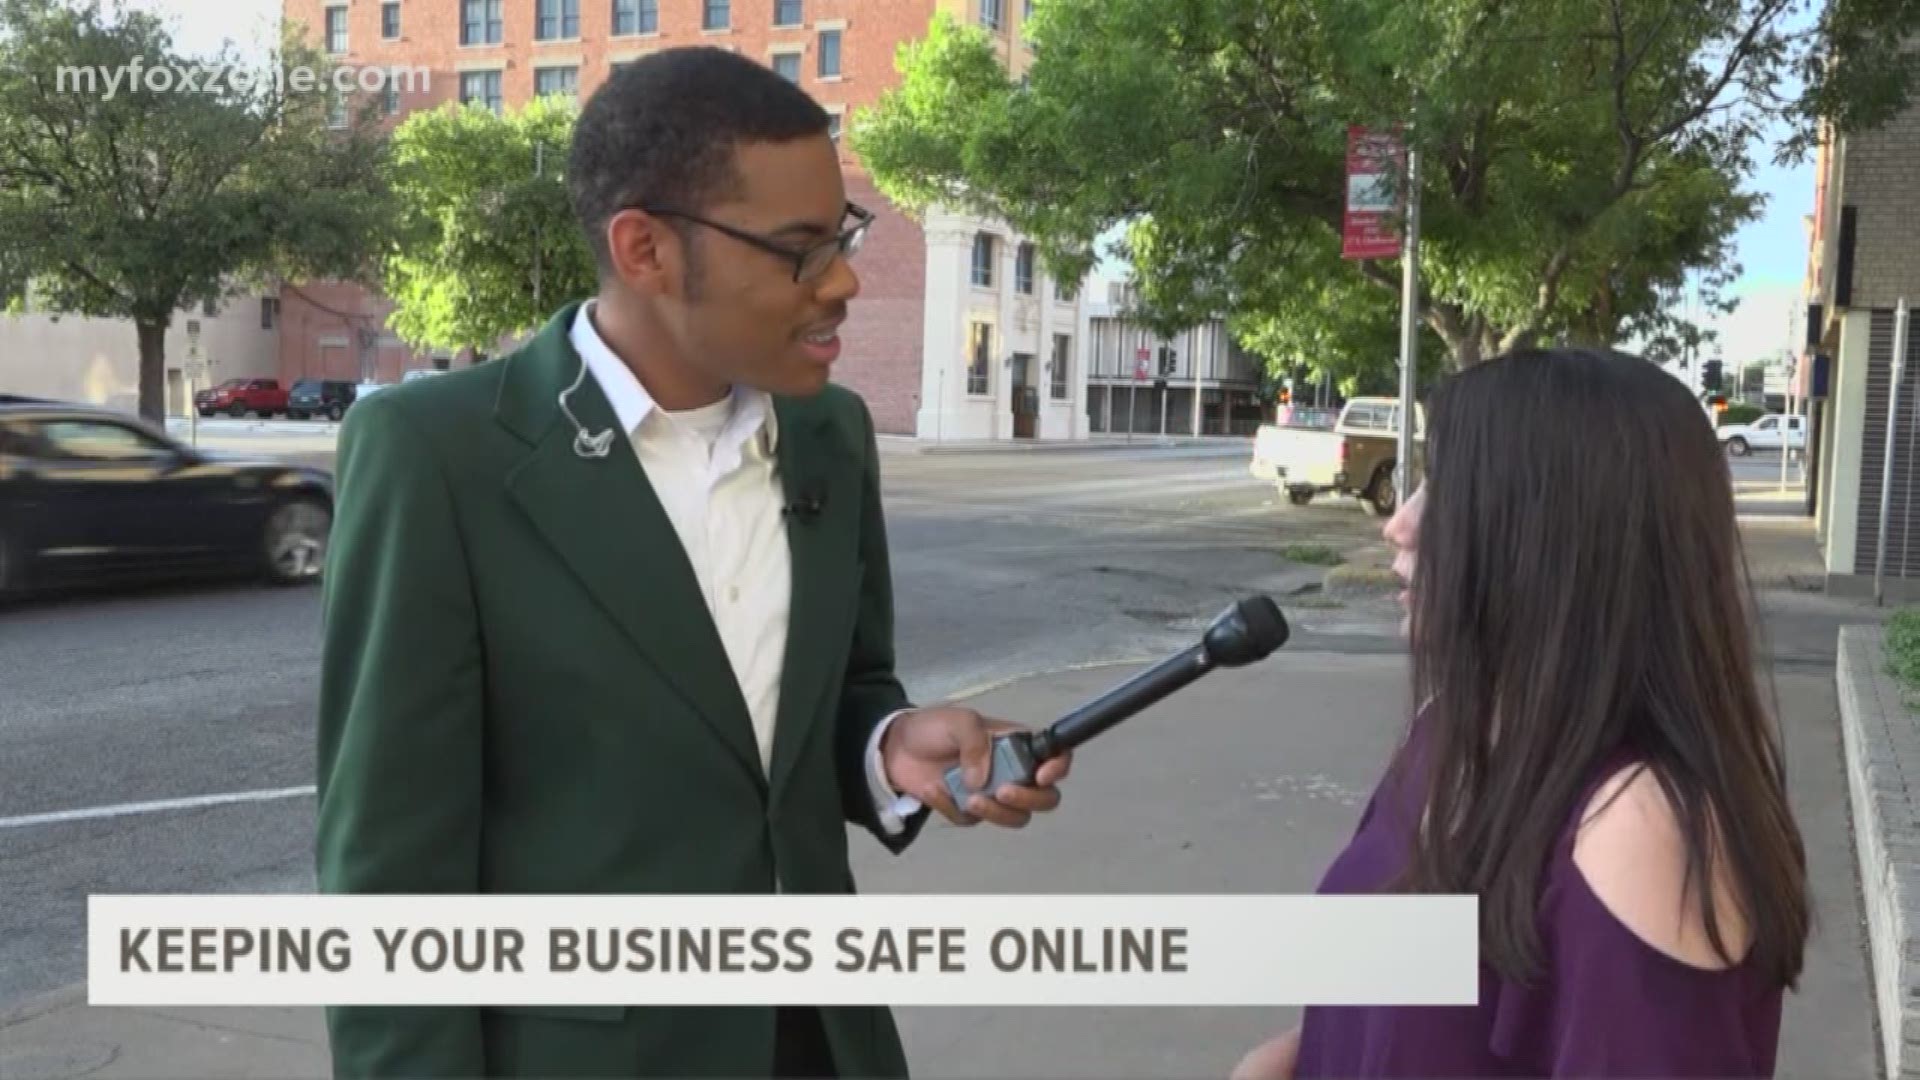 Our Malik Mingo speaks with the Angelo State University Small Business Development Center about some tips on how to keep your business safe online.